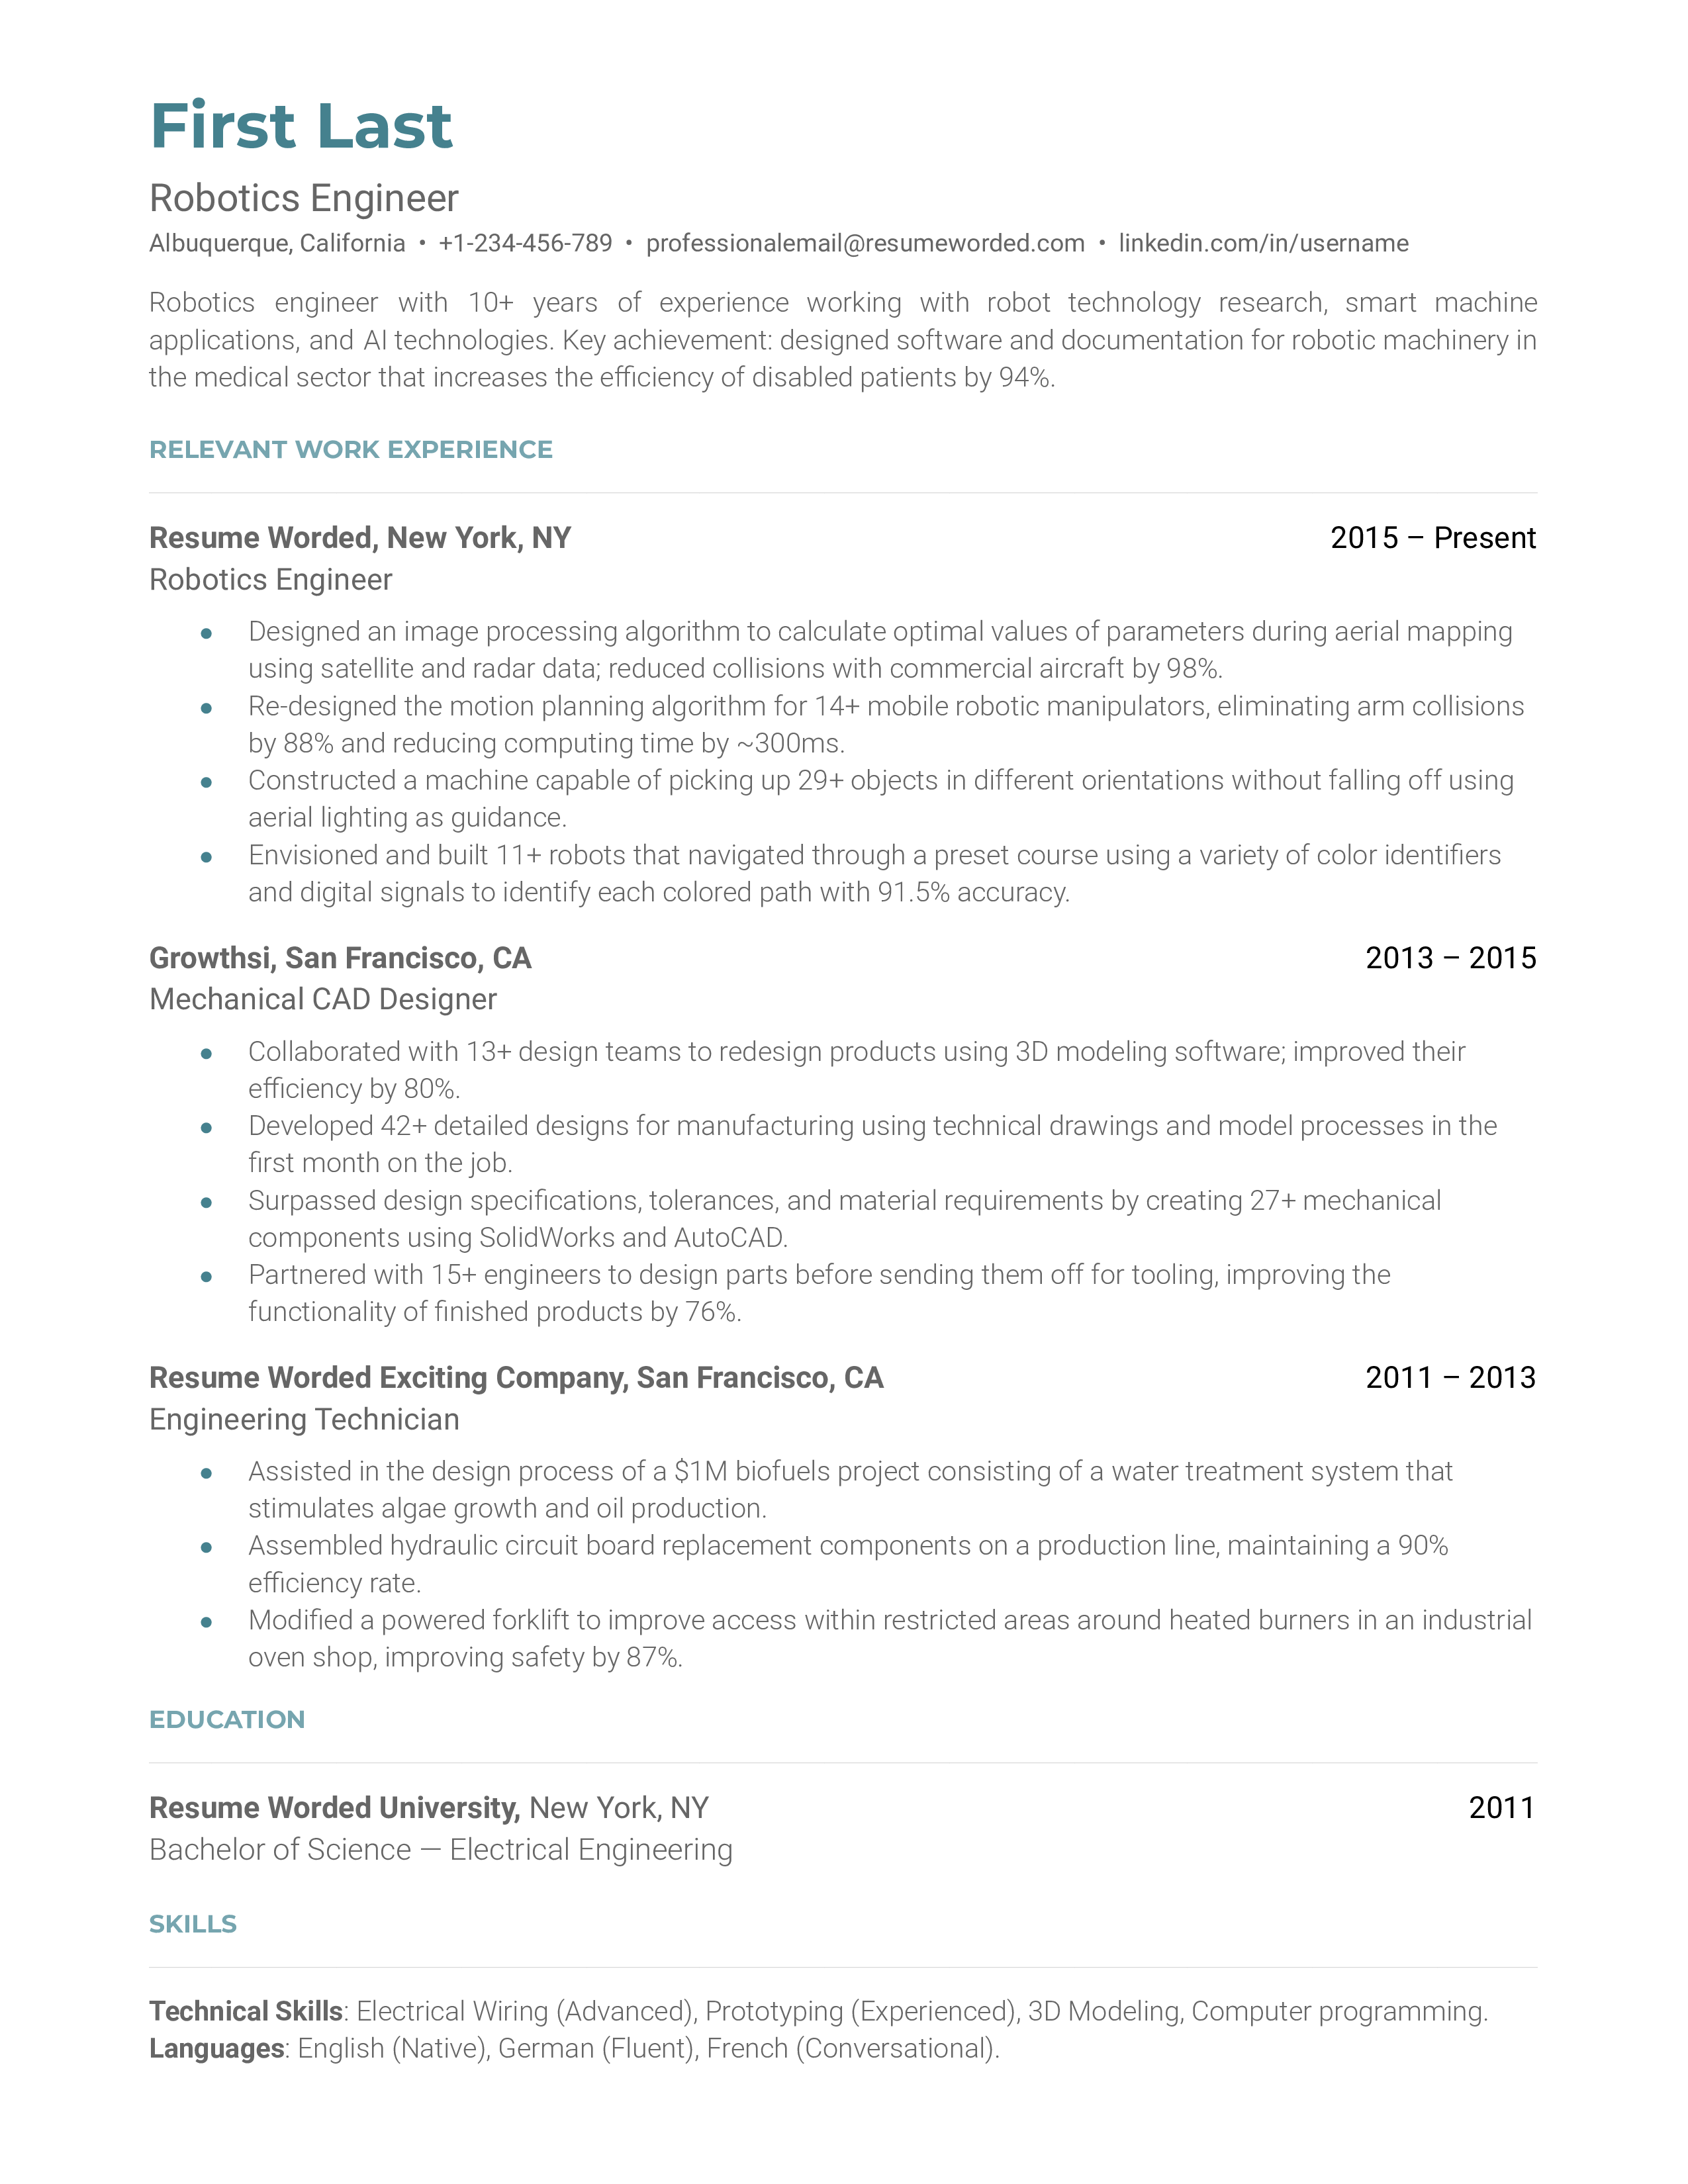 Professional CV of a robotics engineer featuring key skills and experiences.